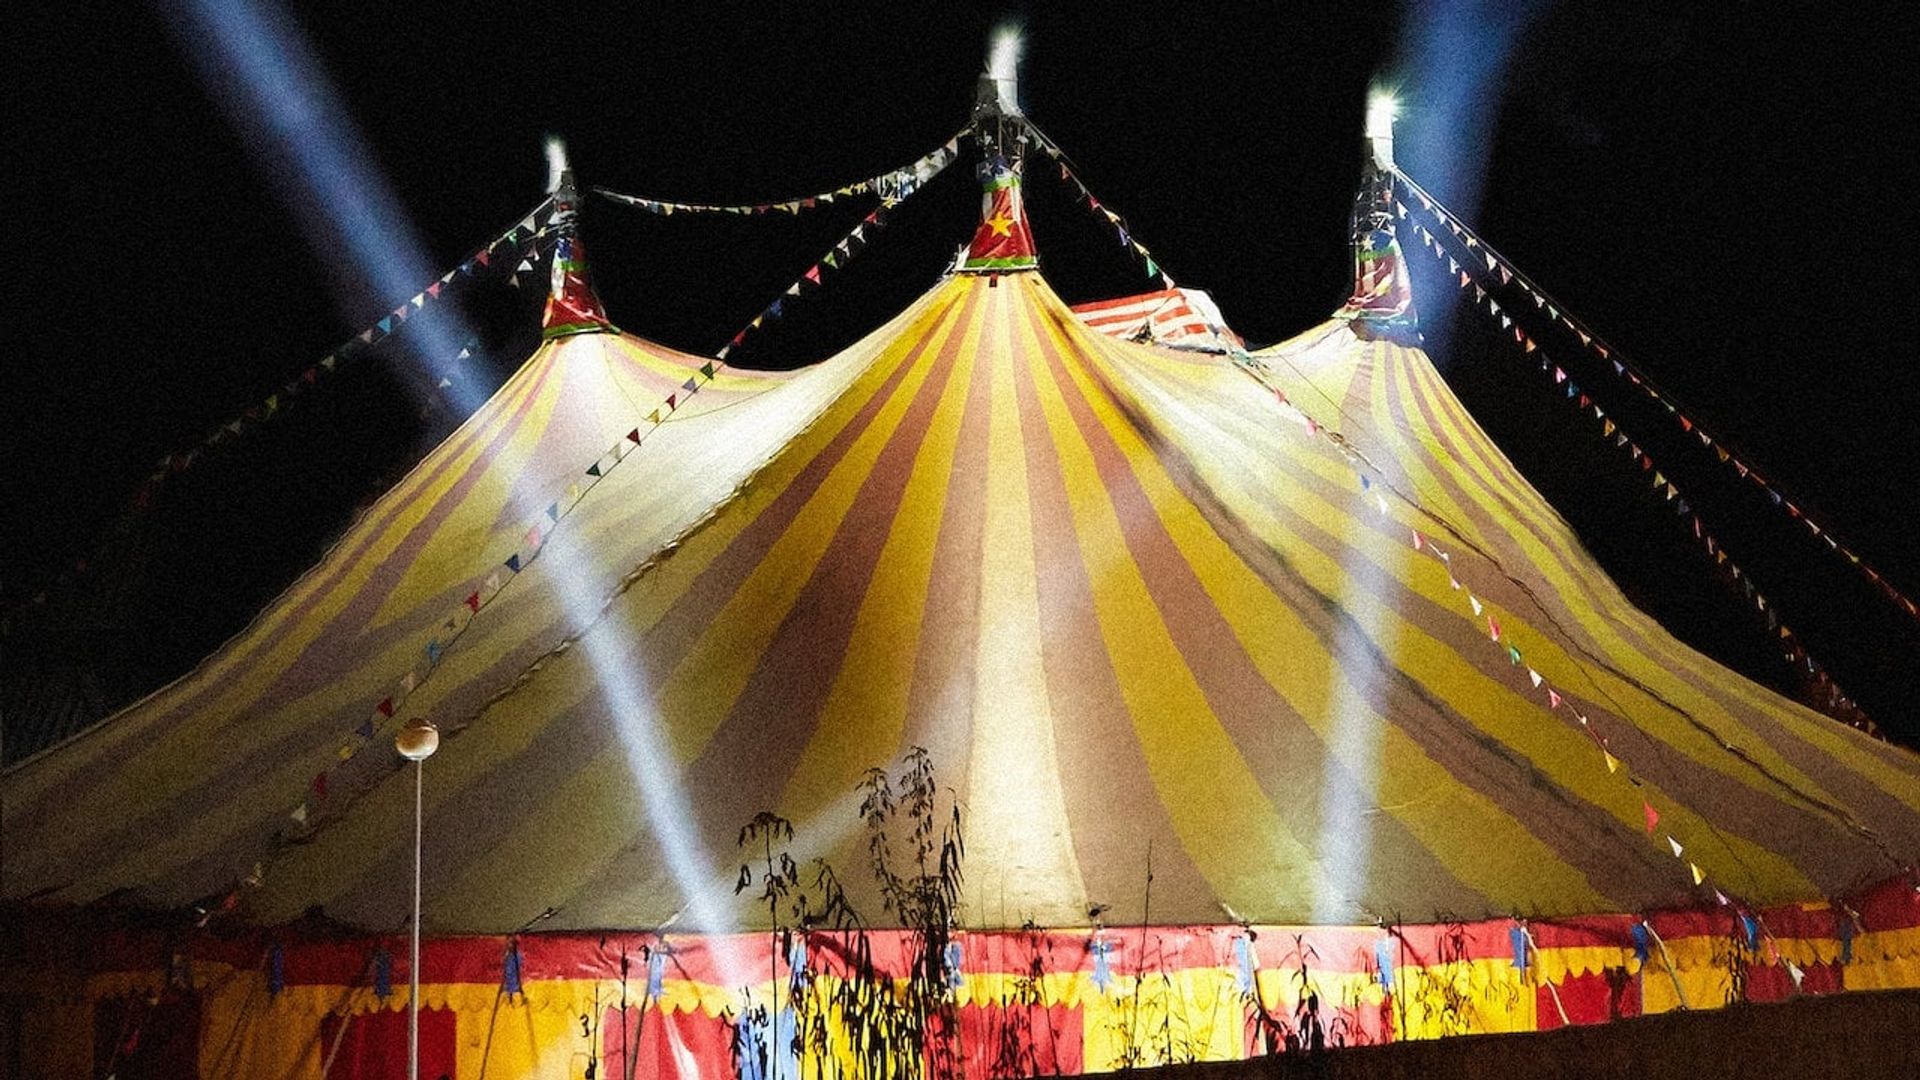 The Circus background